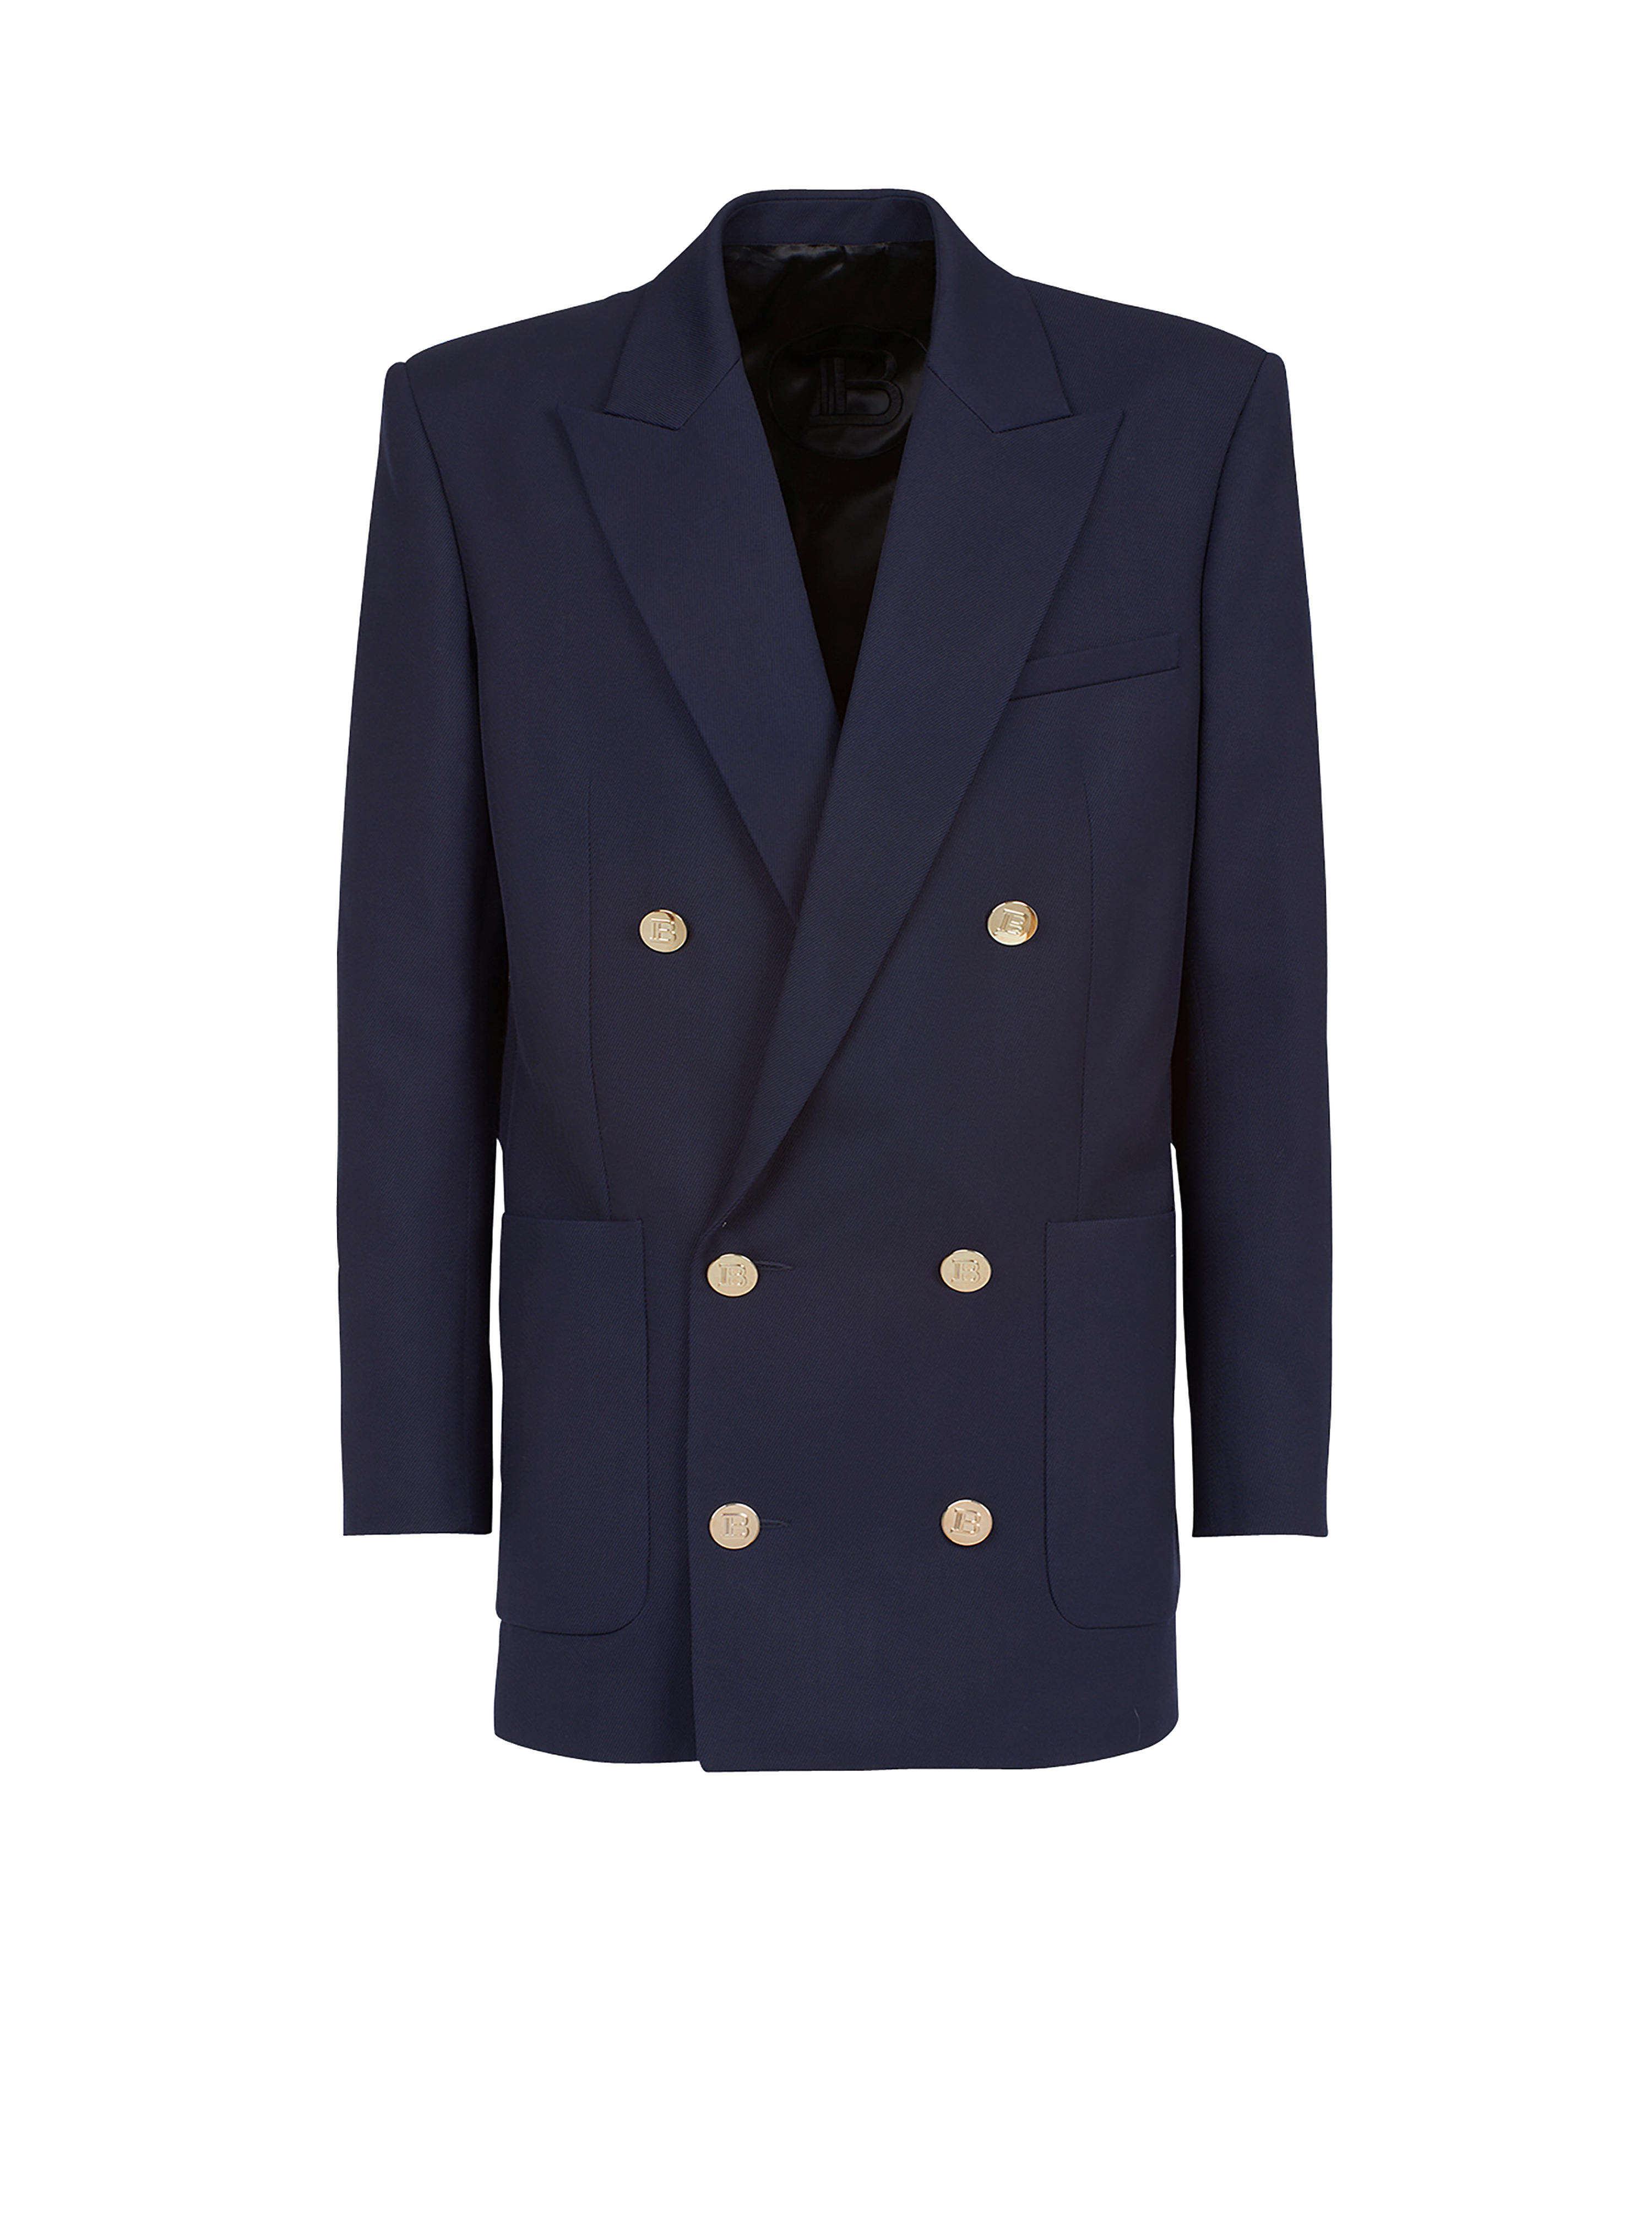 Twill blazer with double-breasted silver-tone buttoned fastening, navy